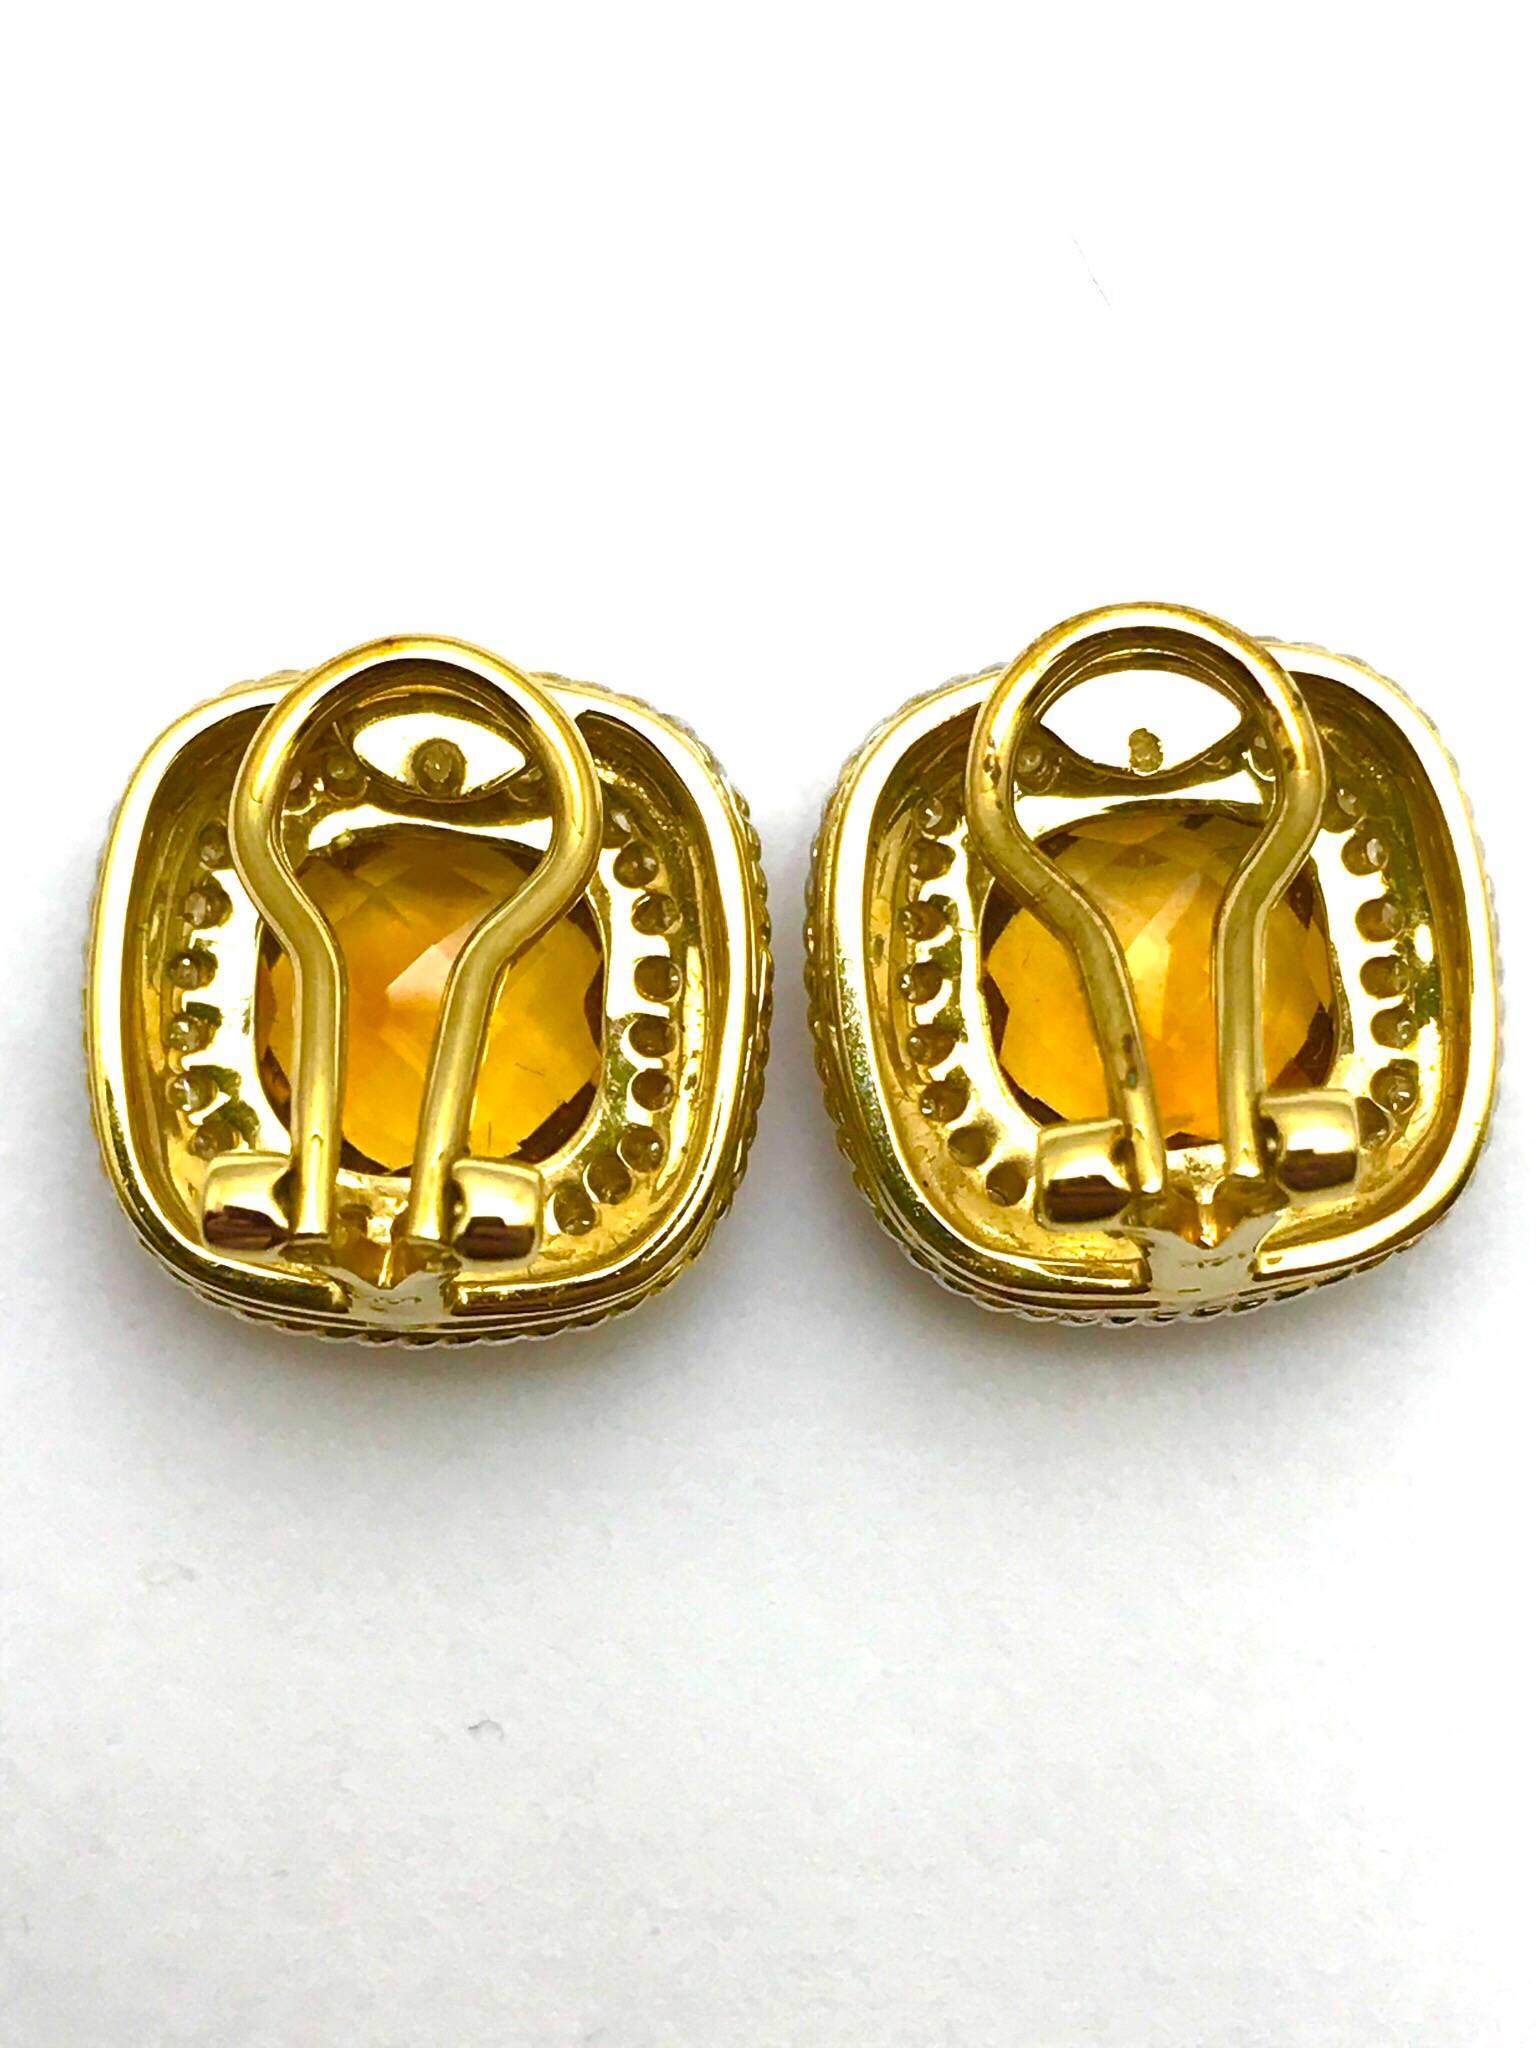 Retro 3.00 Carat Citrine and Diamond White and Yellow Gold Clip Earrings